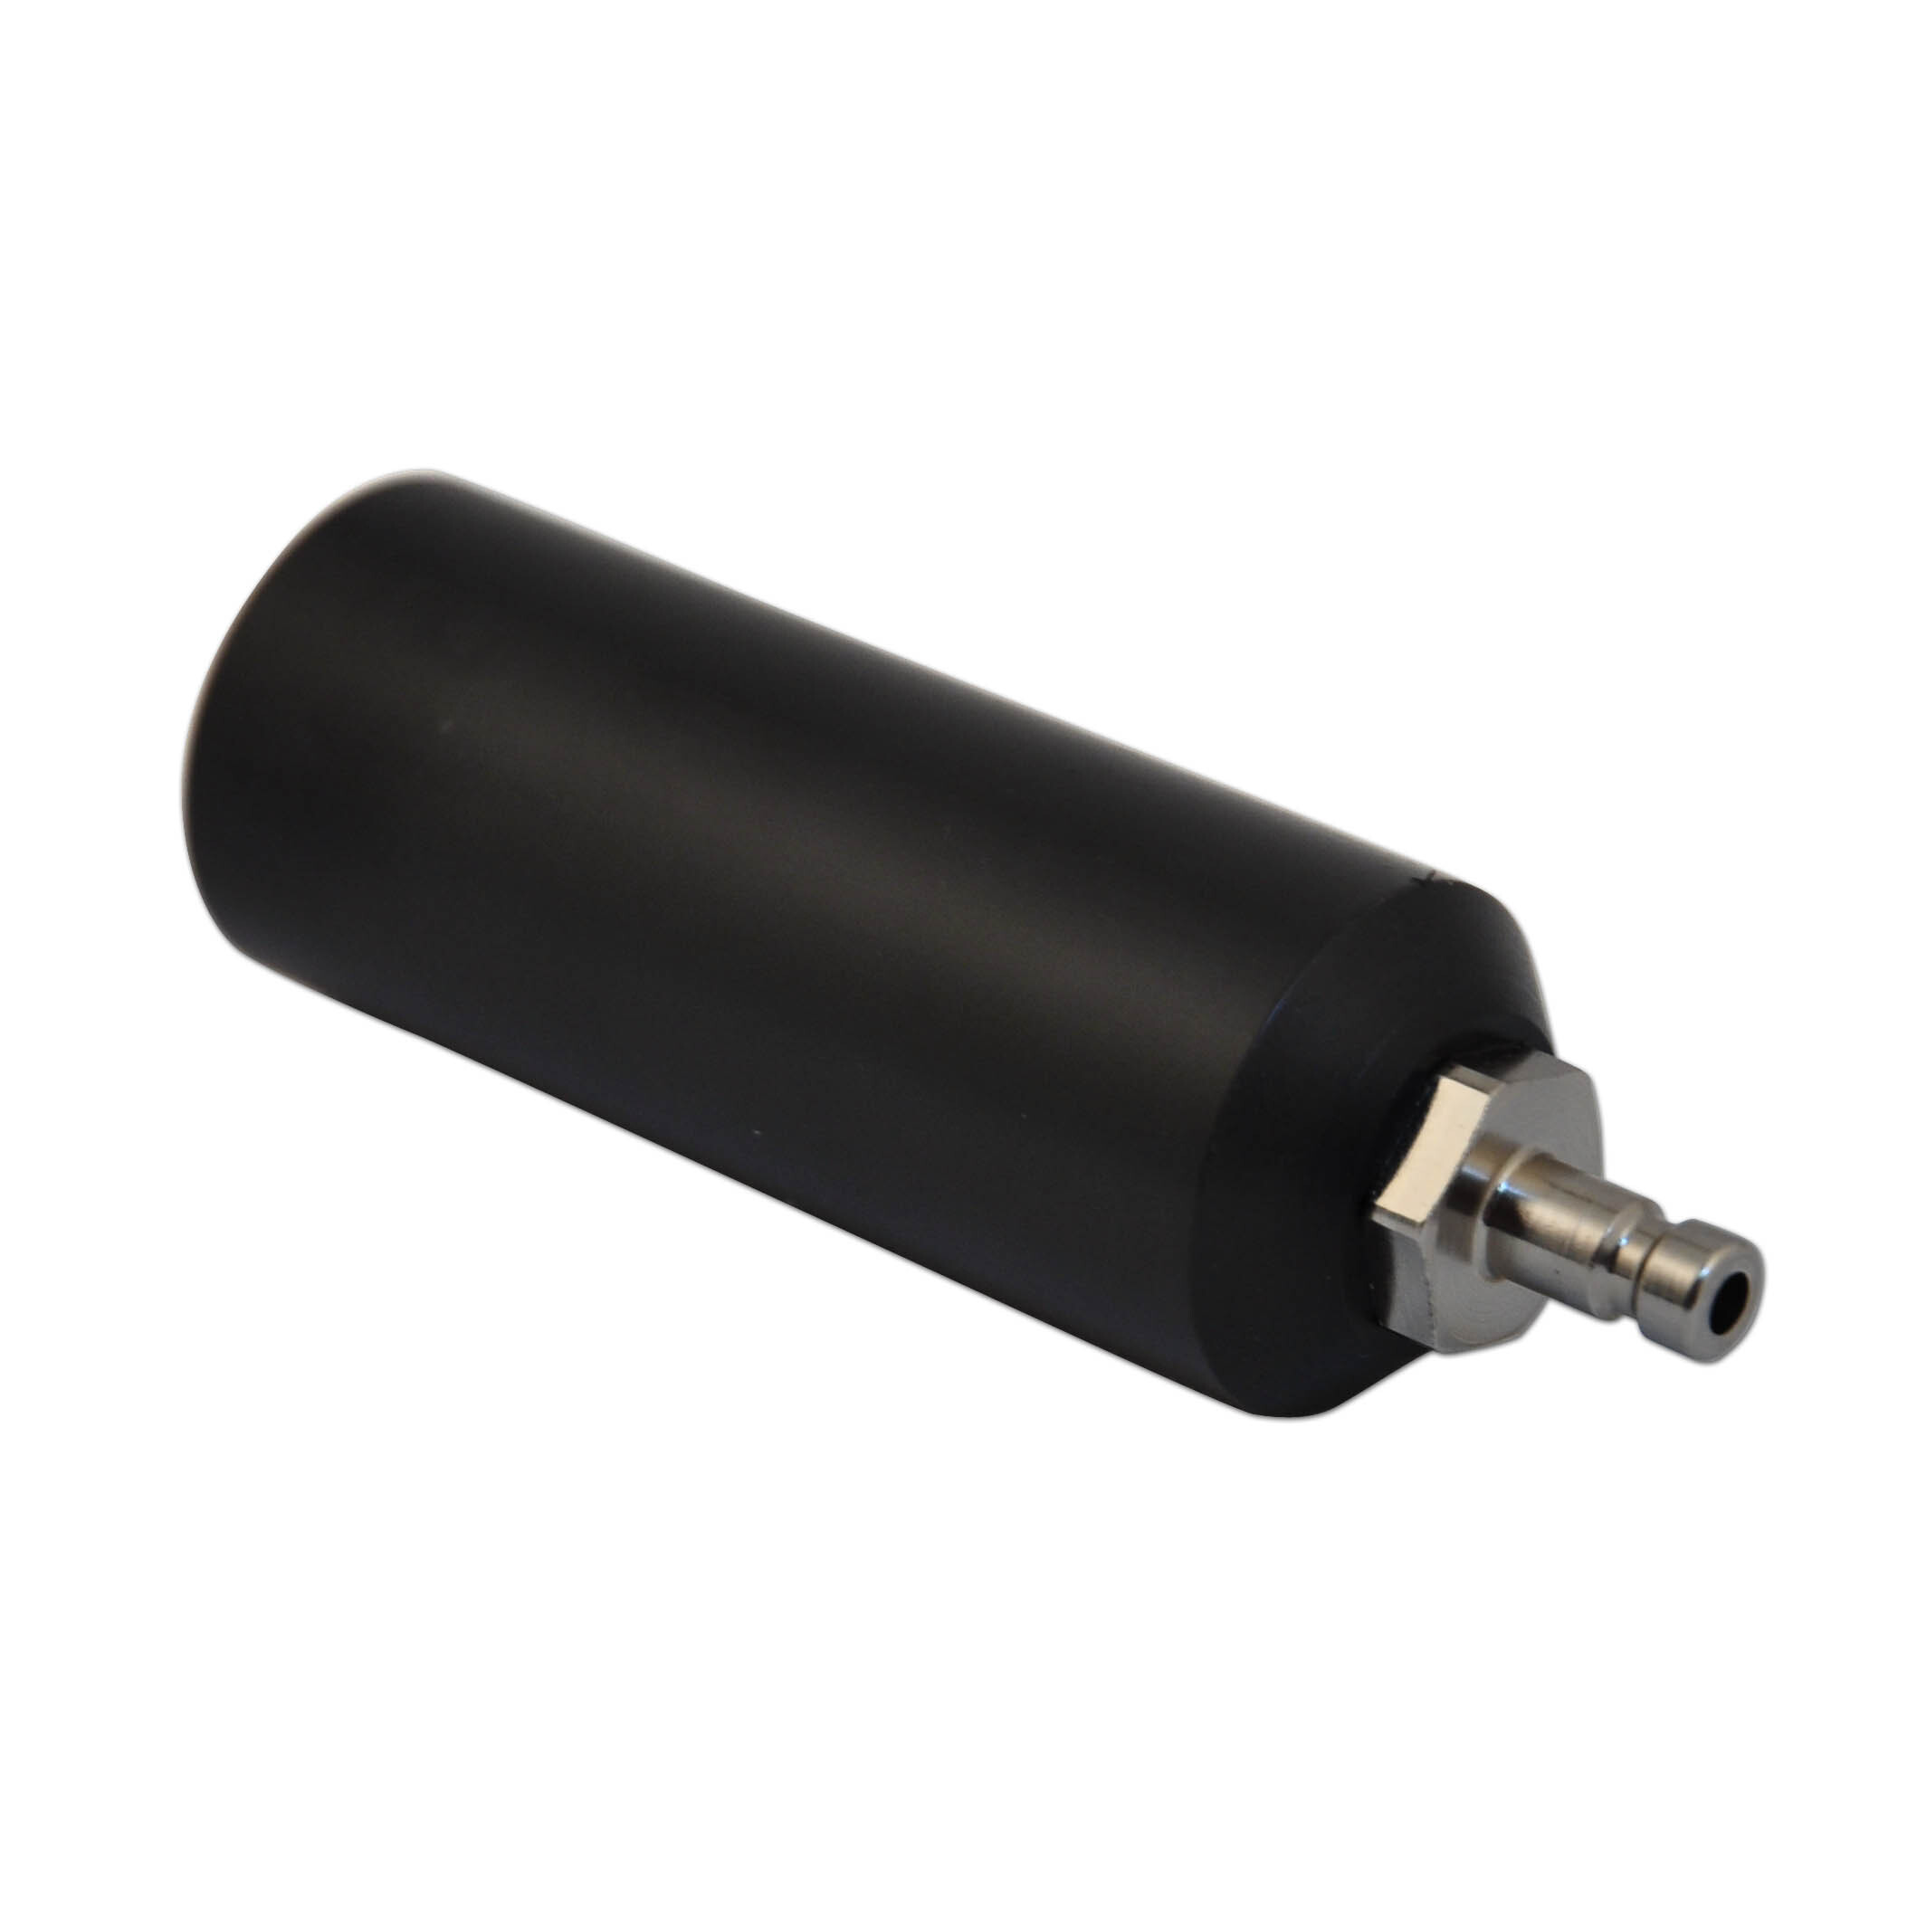 Test gas adapter HMG for flexible quick connection probe V3 With integrated humidity filter.